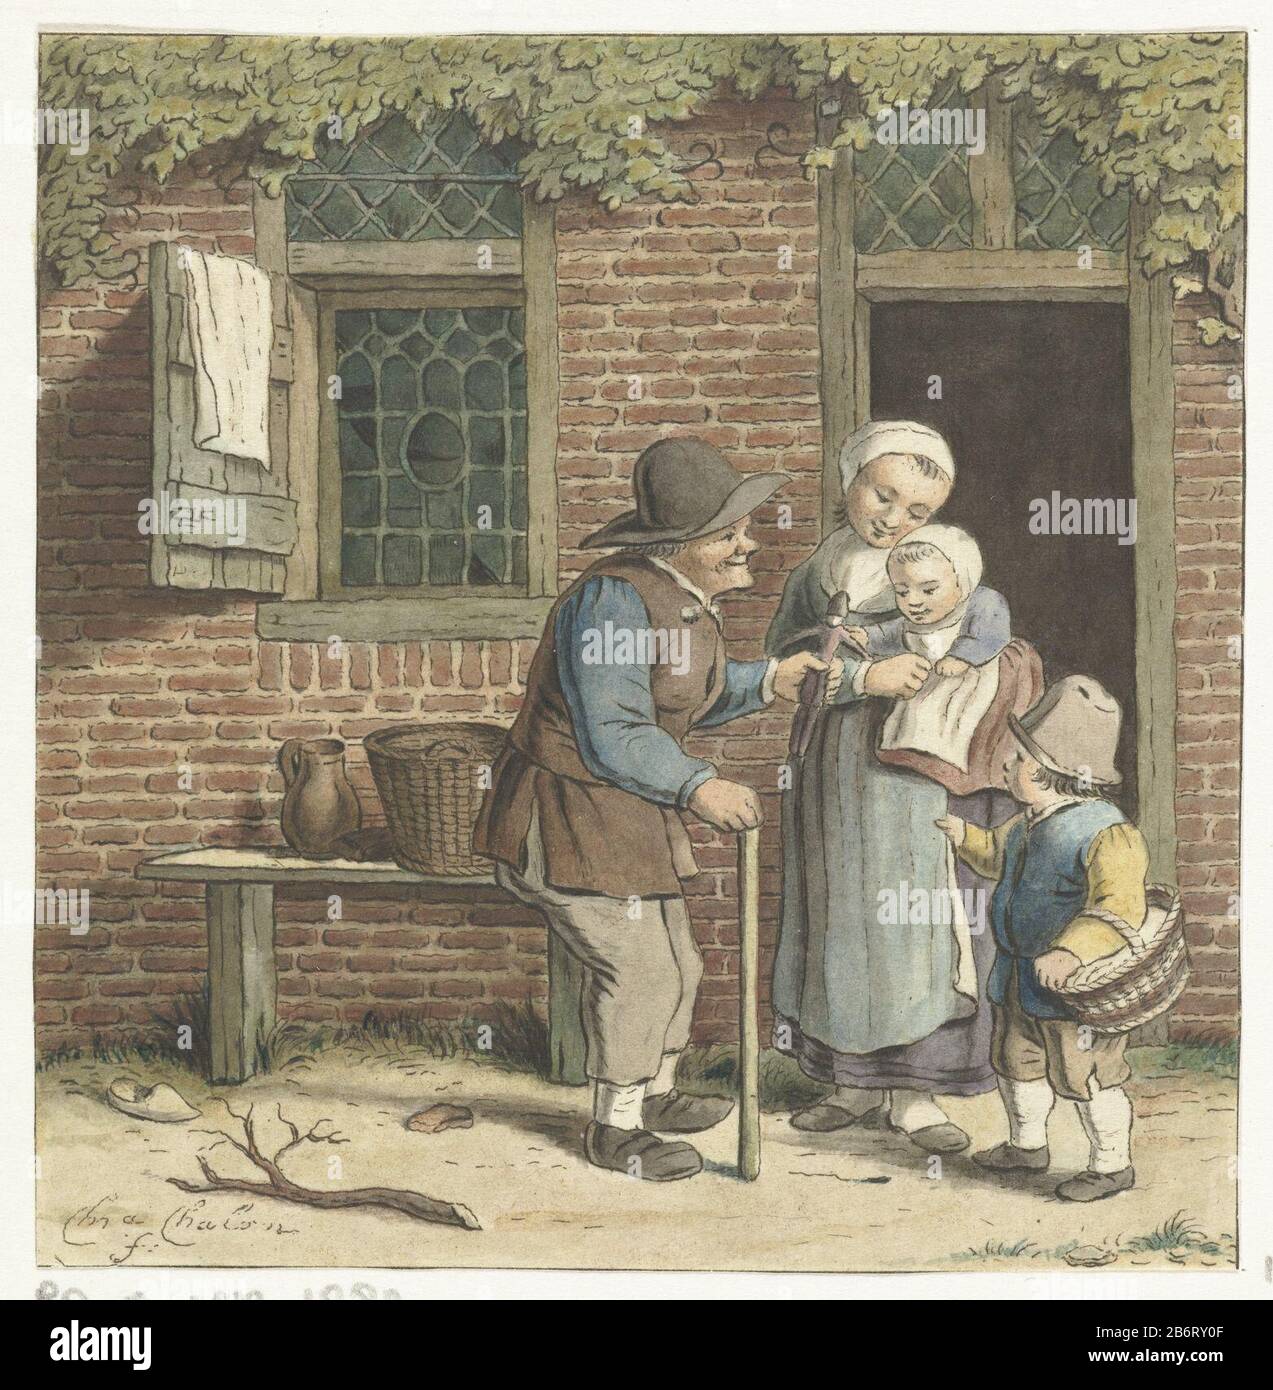 Grootvader deelt speelgoed uit at the threshold of a house is a family of a  mother and two children. An old man, Where: apparently their grandfather,  the youngest child a doll to